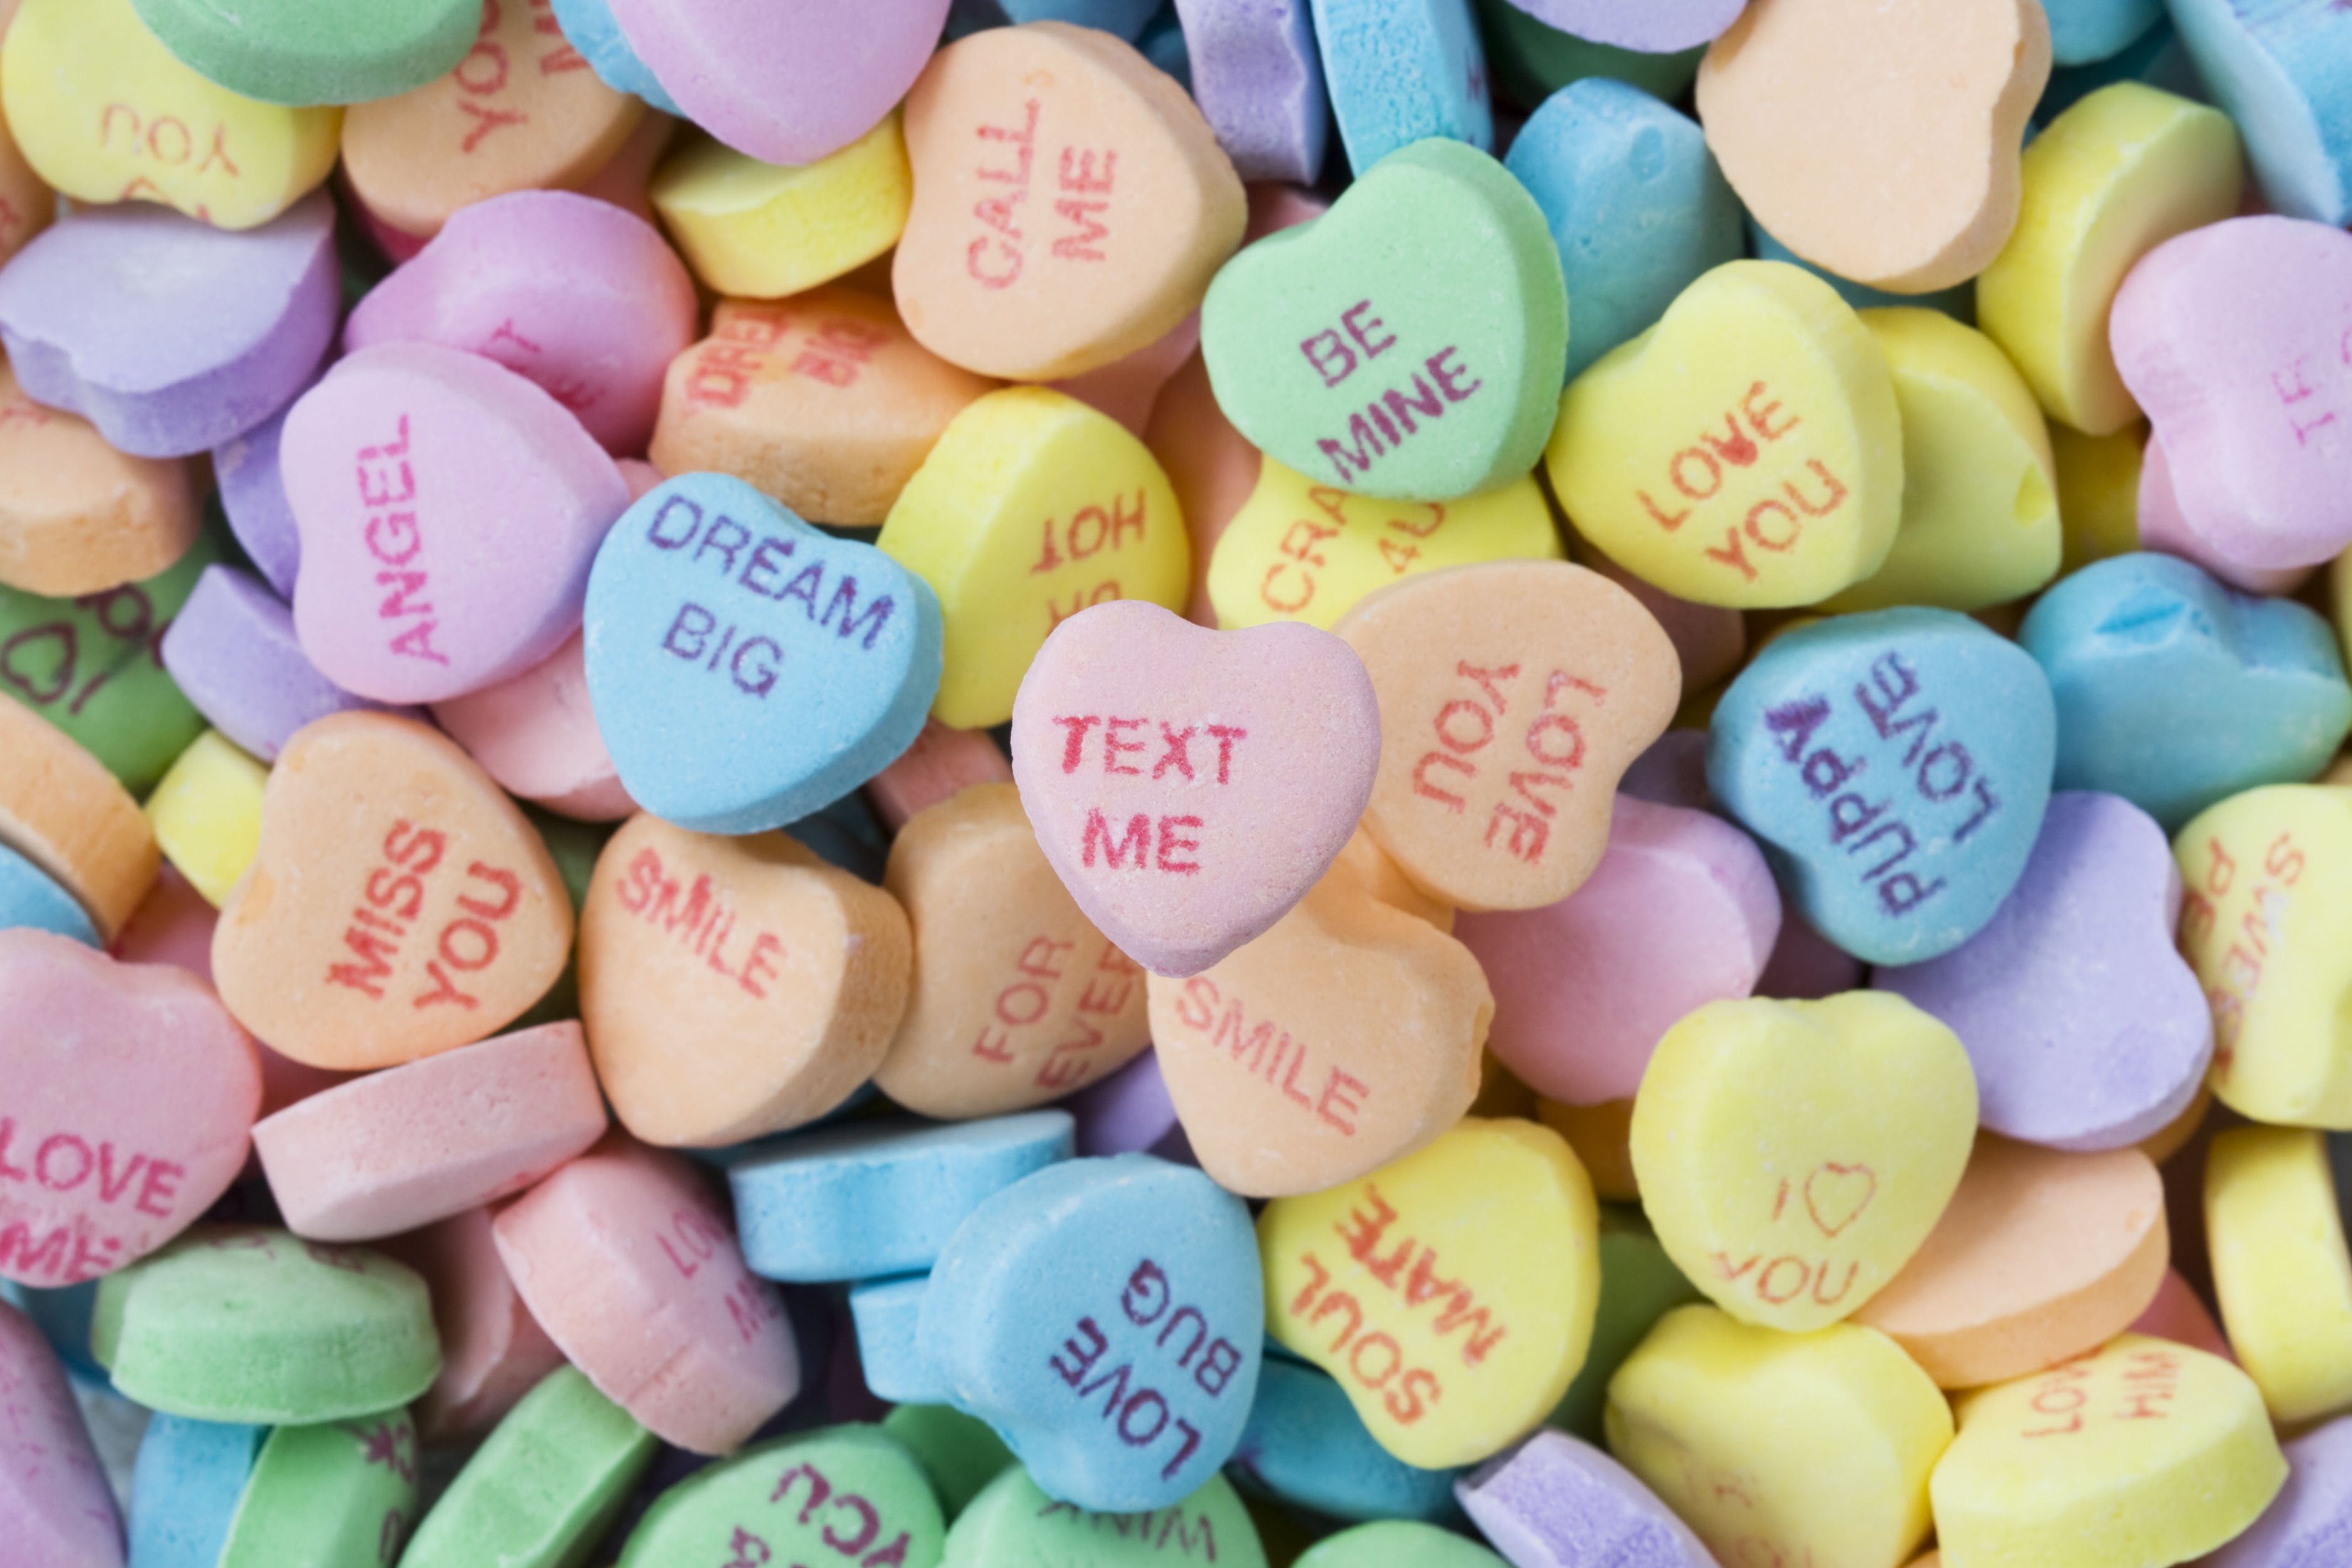 STANK LOVE, BEAR WIG, and other sayings from AI-generated candy hearts